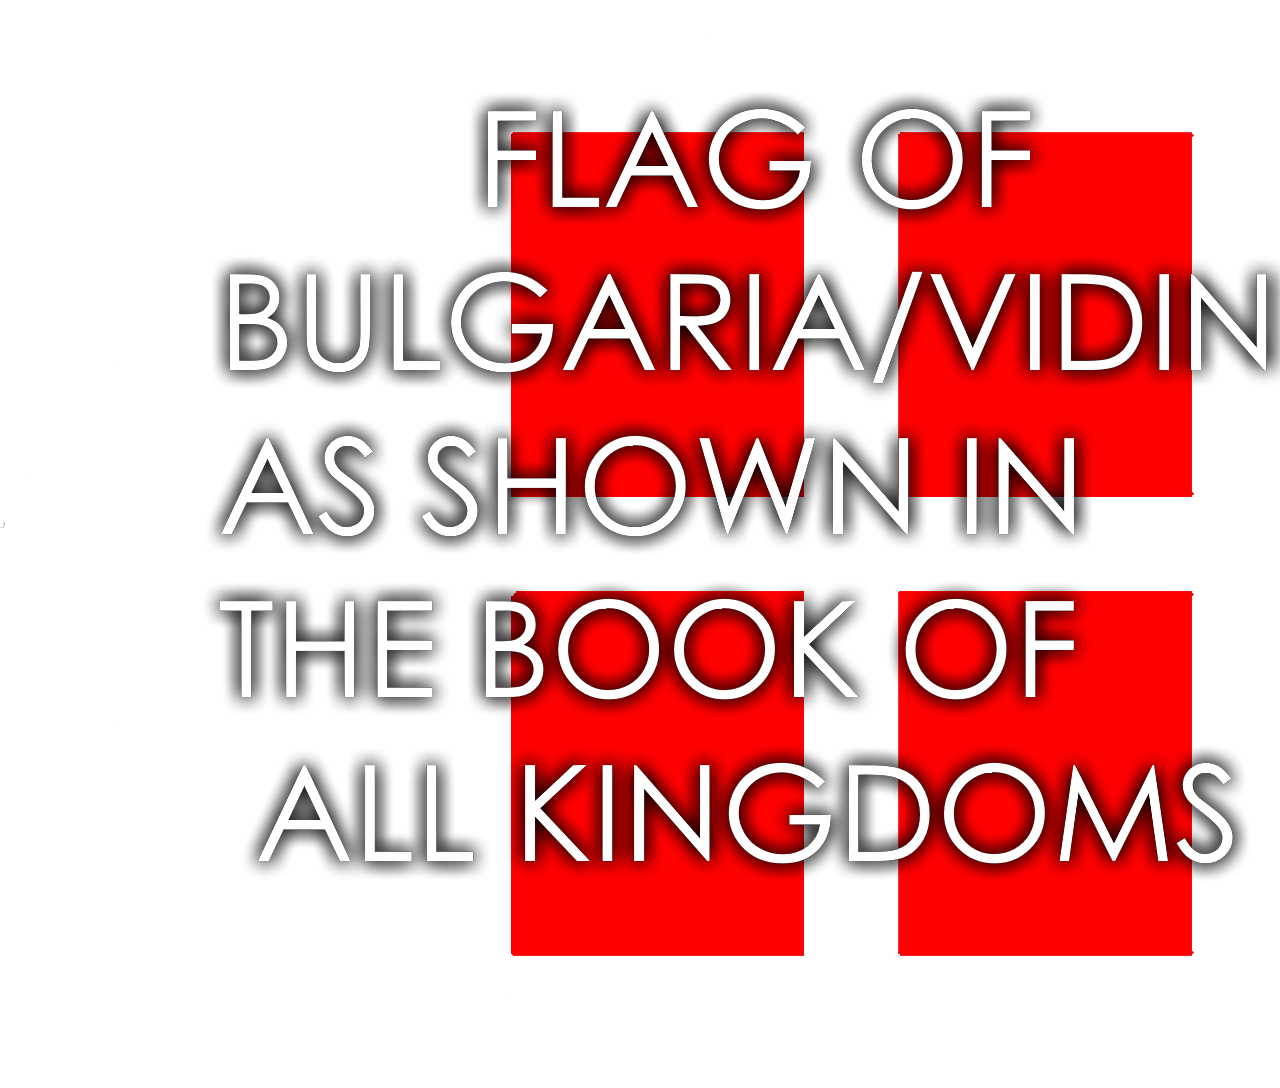 Bulgaria as Shown in the Book of all Kingdoms